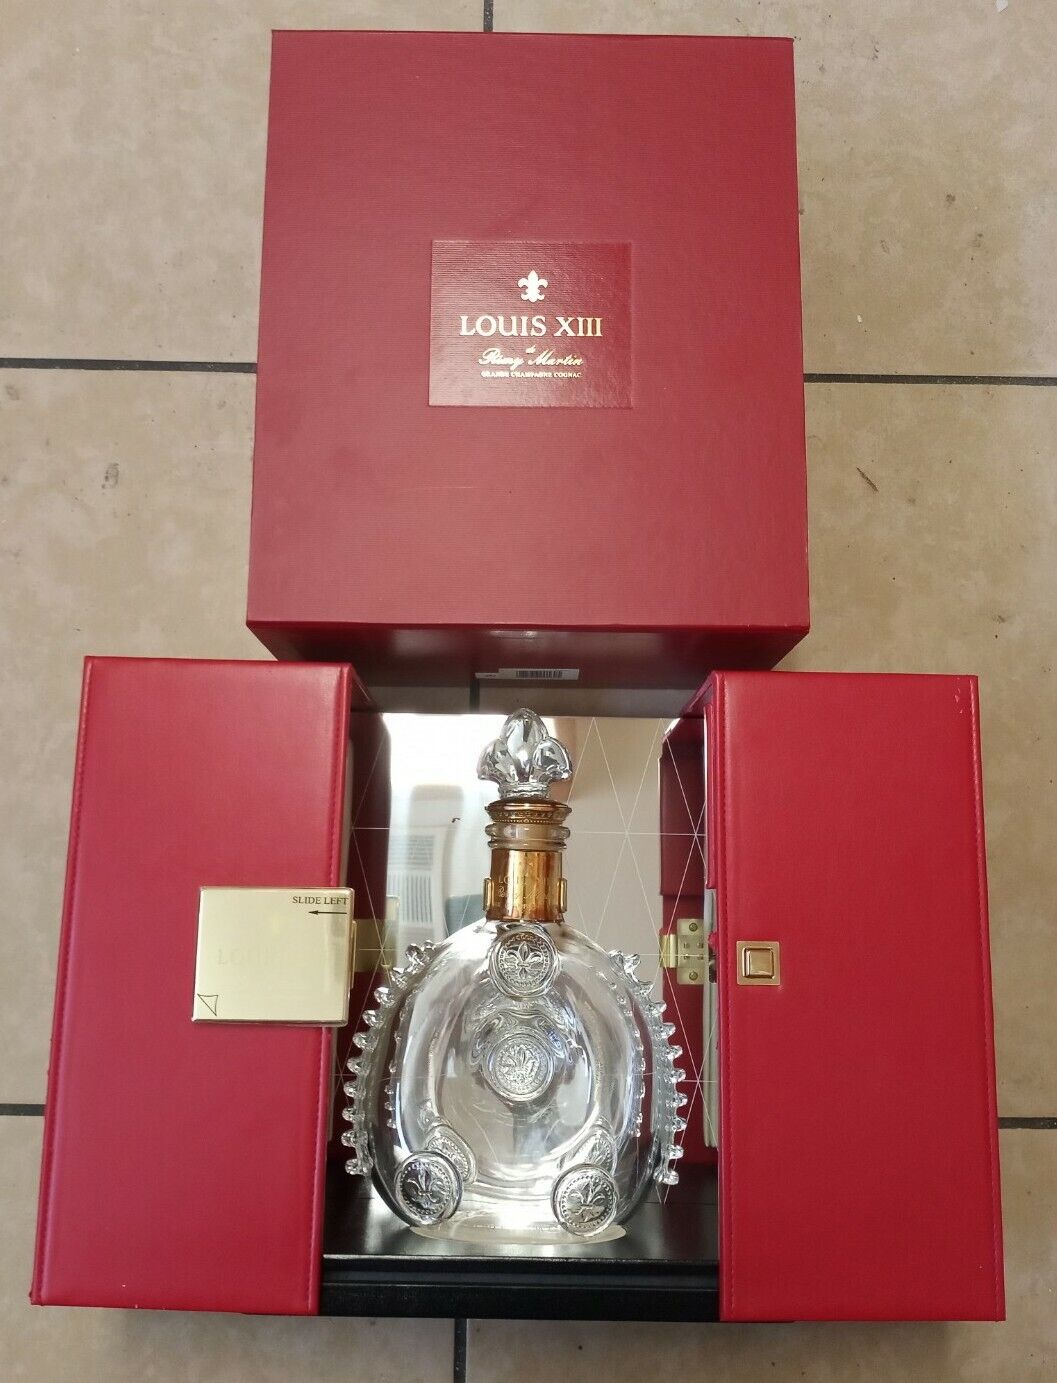 REMY MARTIN LOUIS XIII COGNAC EMPTY BACCARAT CRYSTAL DECANTER W/ SLIDING DISPLAY